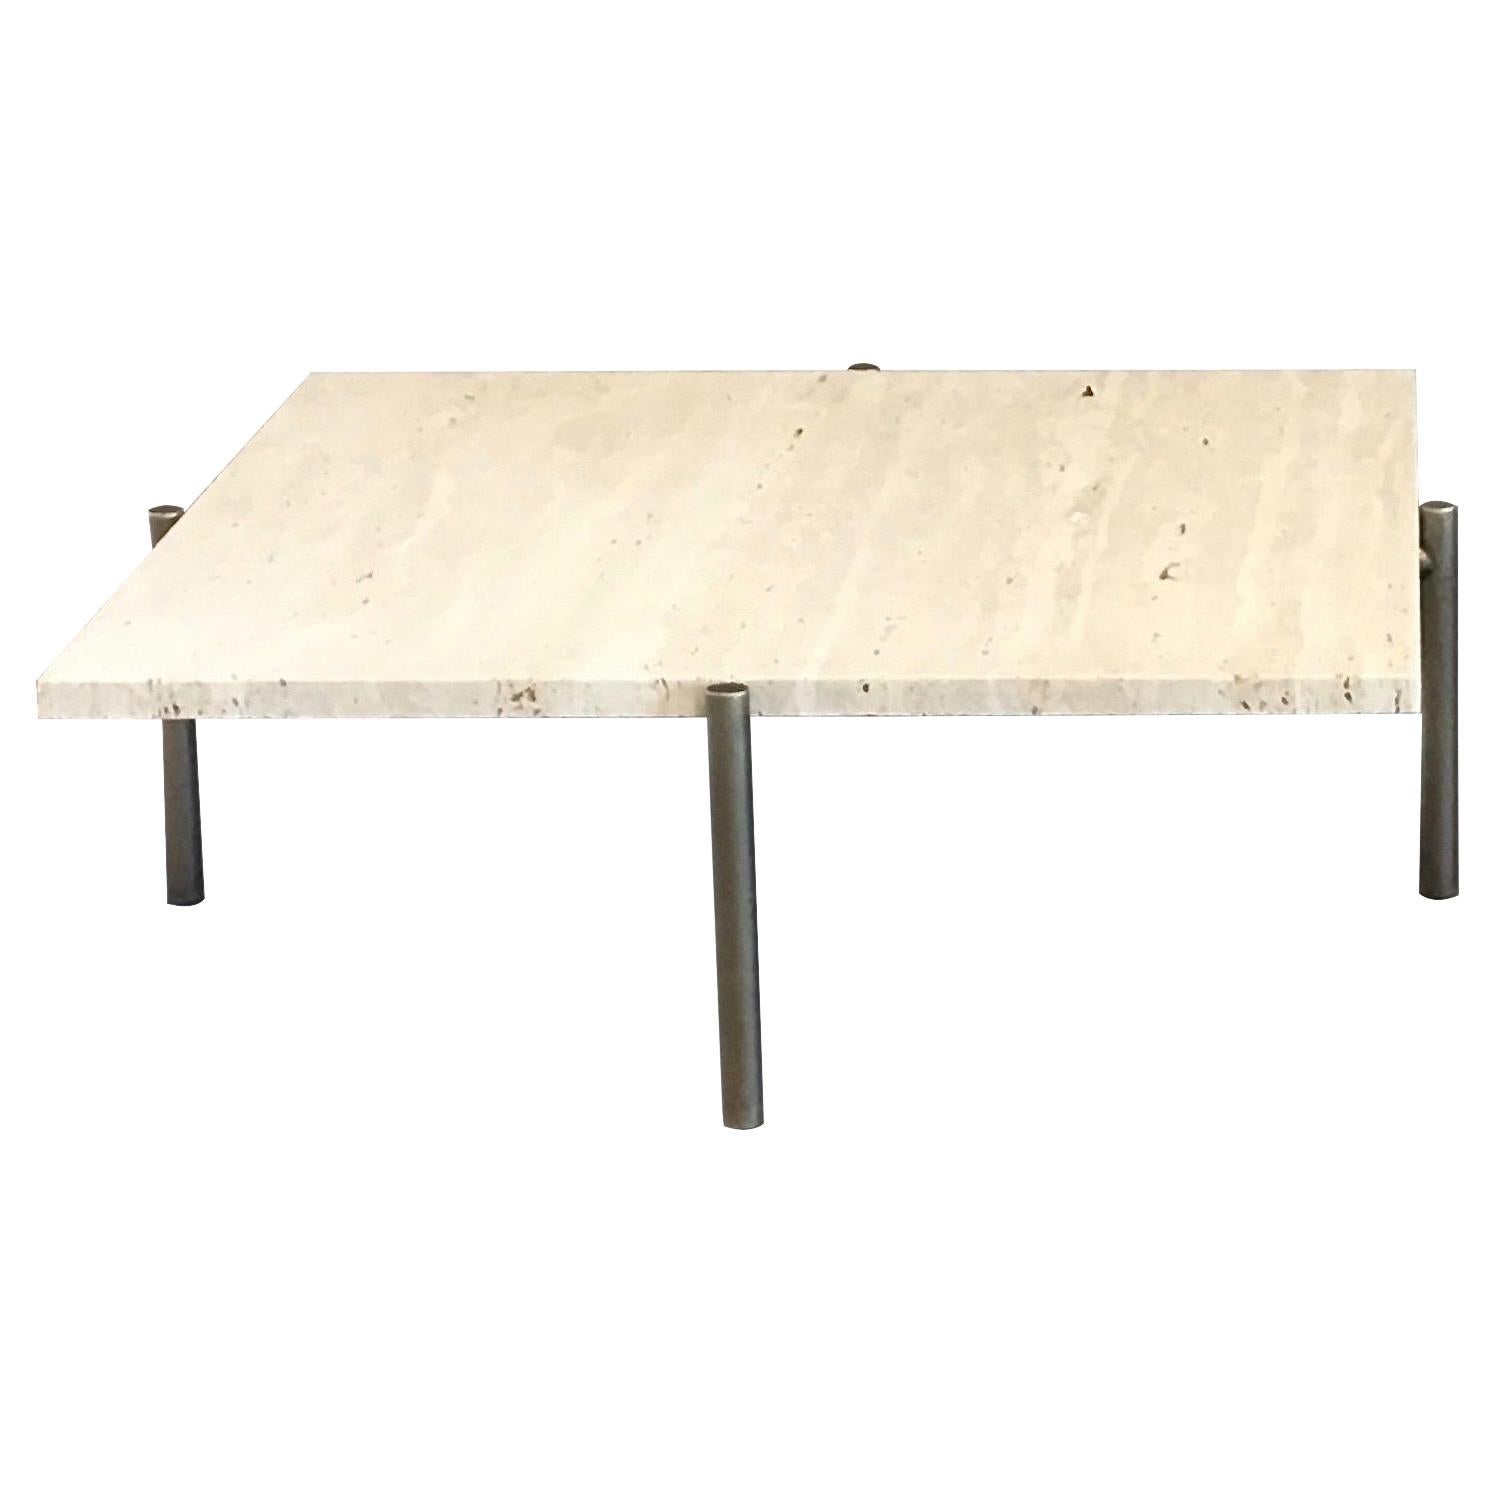 Tivoli Coffee Table 4 Legs Square 39" Travertine Top Brass or Bronze Plated Base For Sale